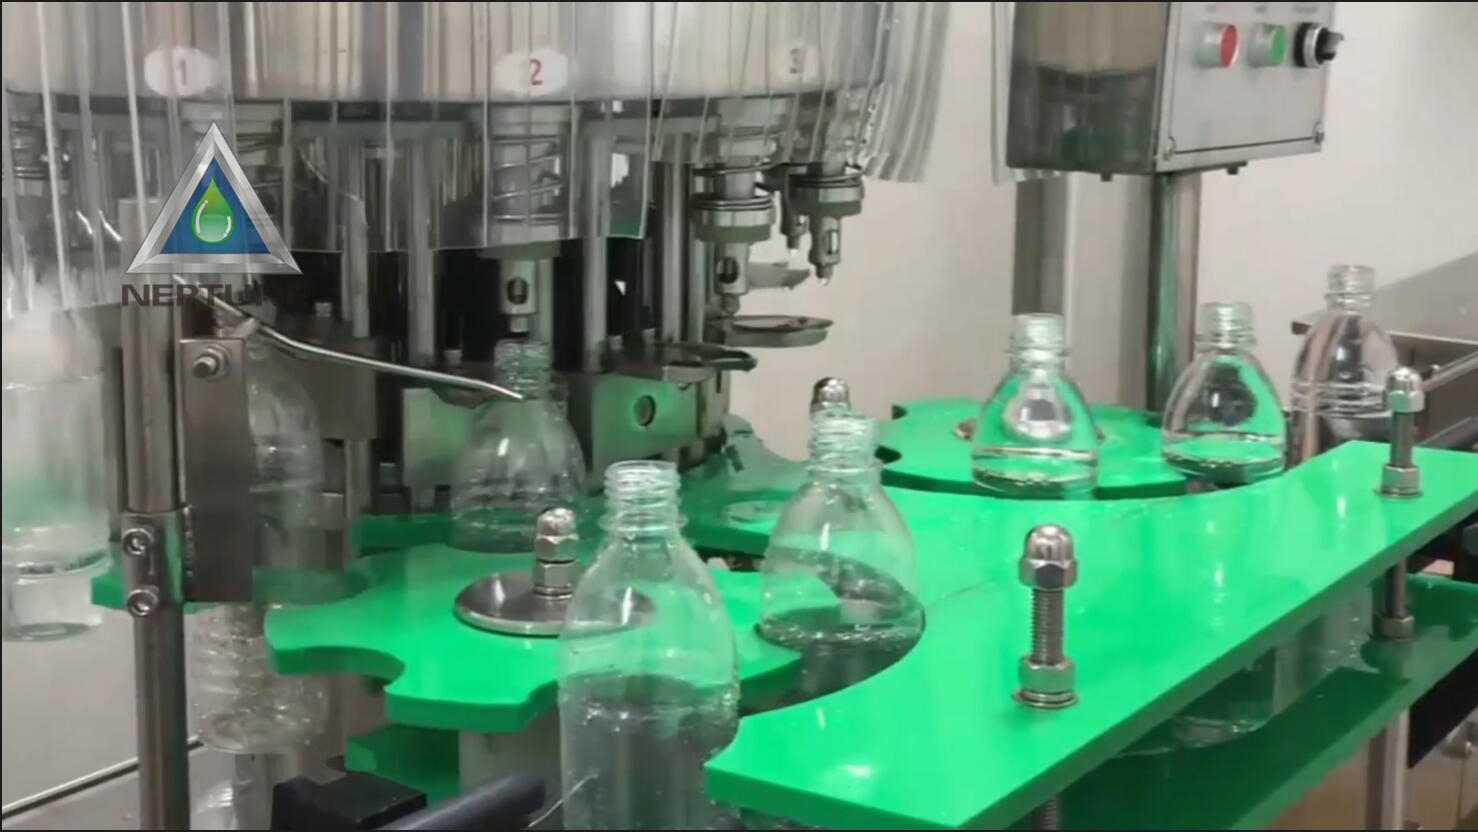 2th rotary filling machine of the 4in1 water bottling machine